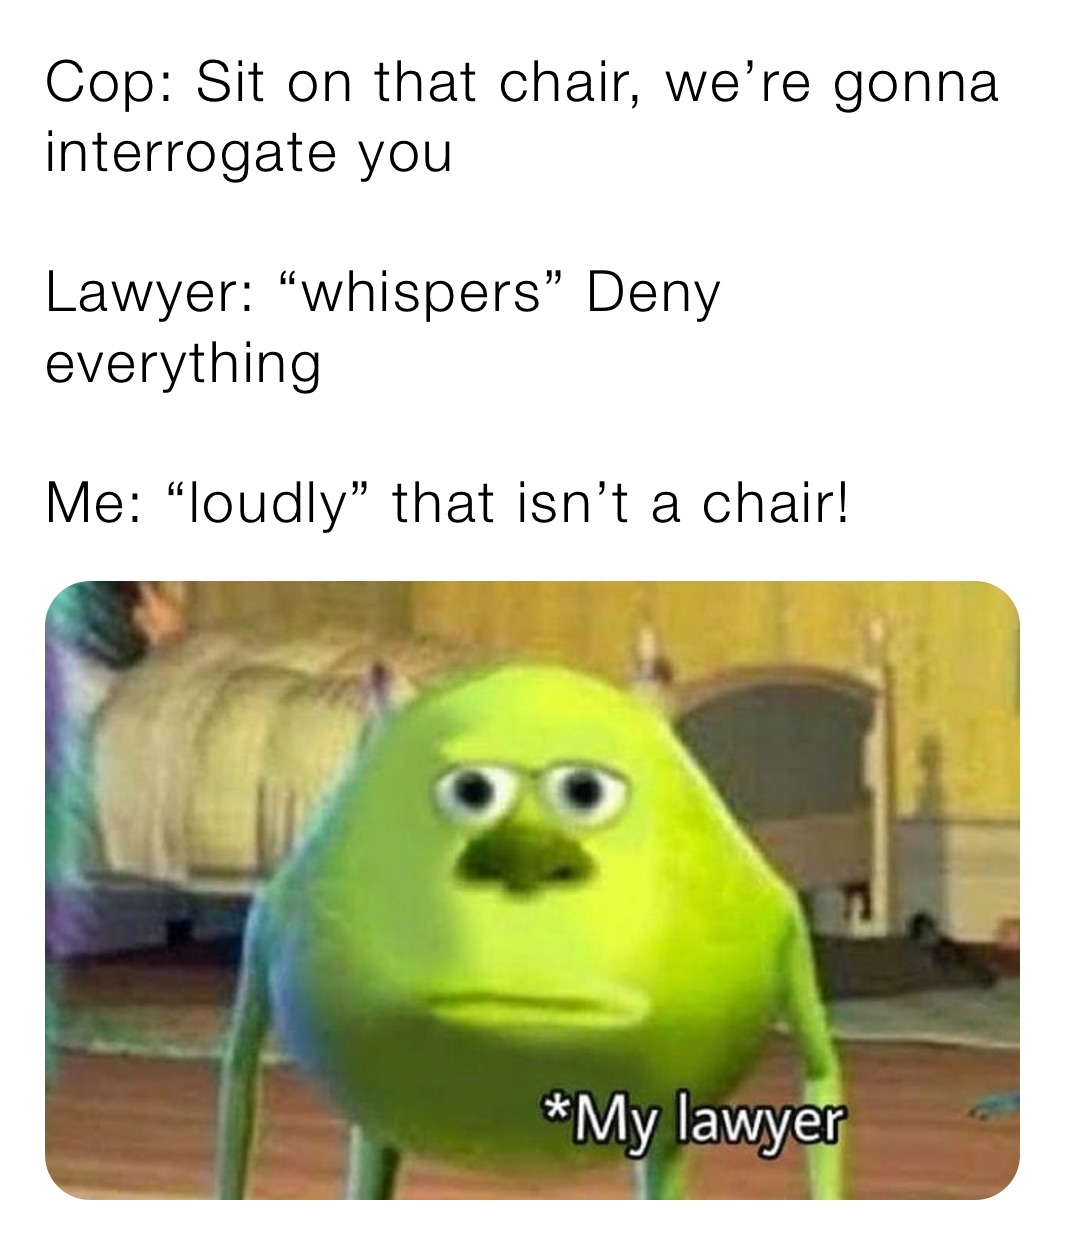 Cop: Sit on that chair, we’re gonna interrogate you 

Lawyer: “whispers” Deny everything 

Me: “loudly” that isn’t a chair!